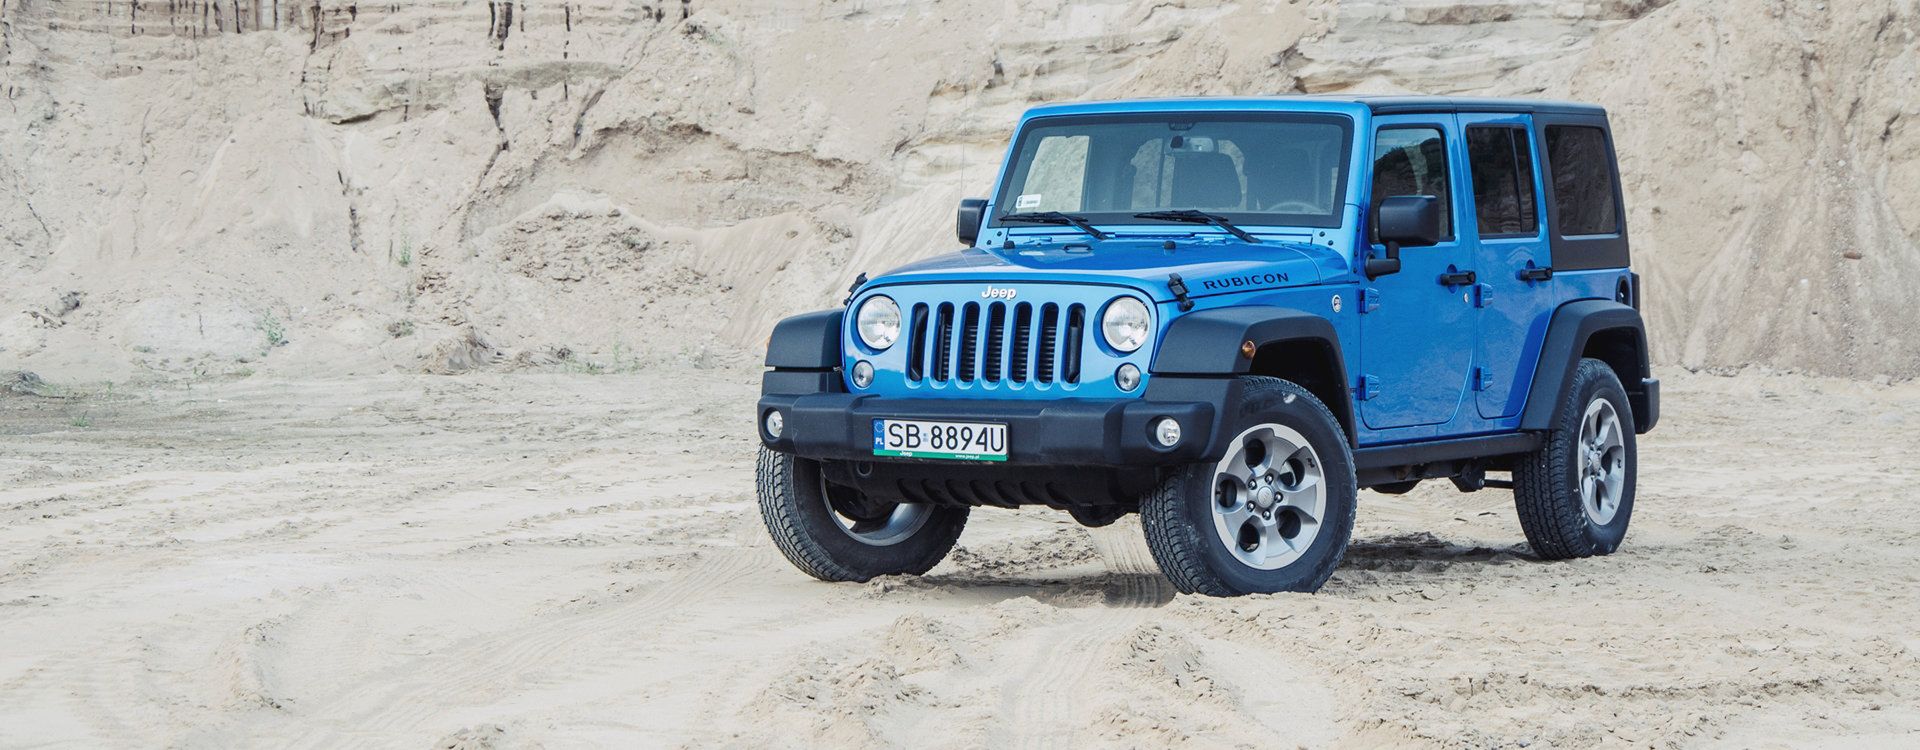 Jeep Wrangler (Jk) Unlimited Rubicon 2.8 Crd (2017) - Test, Opinia | Autokult.pl